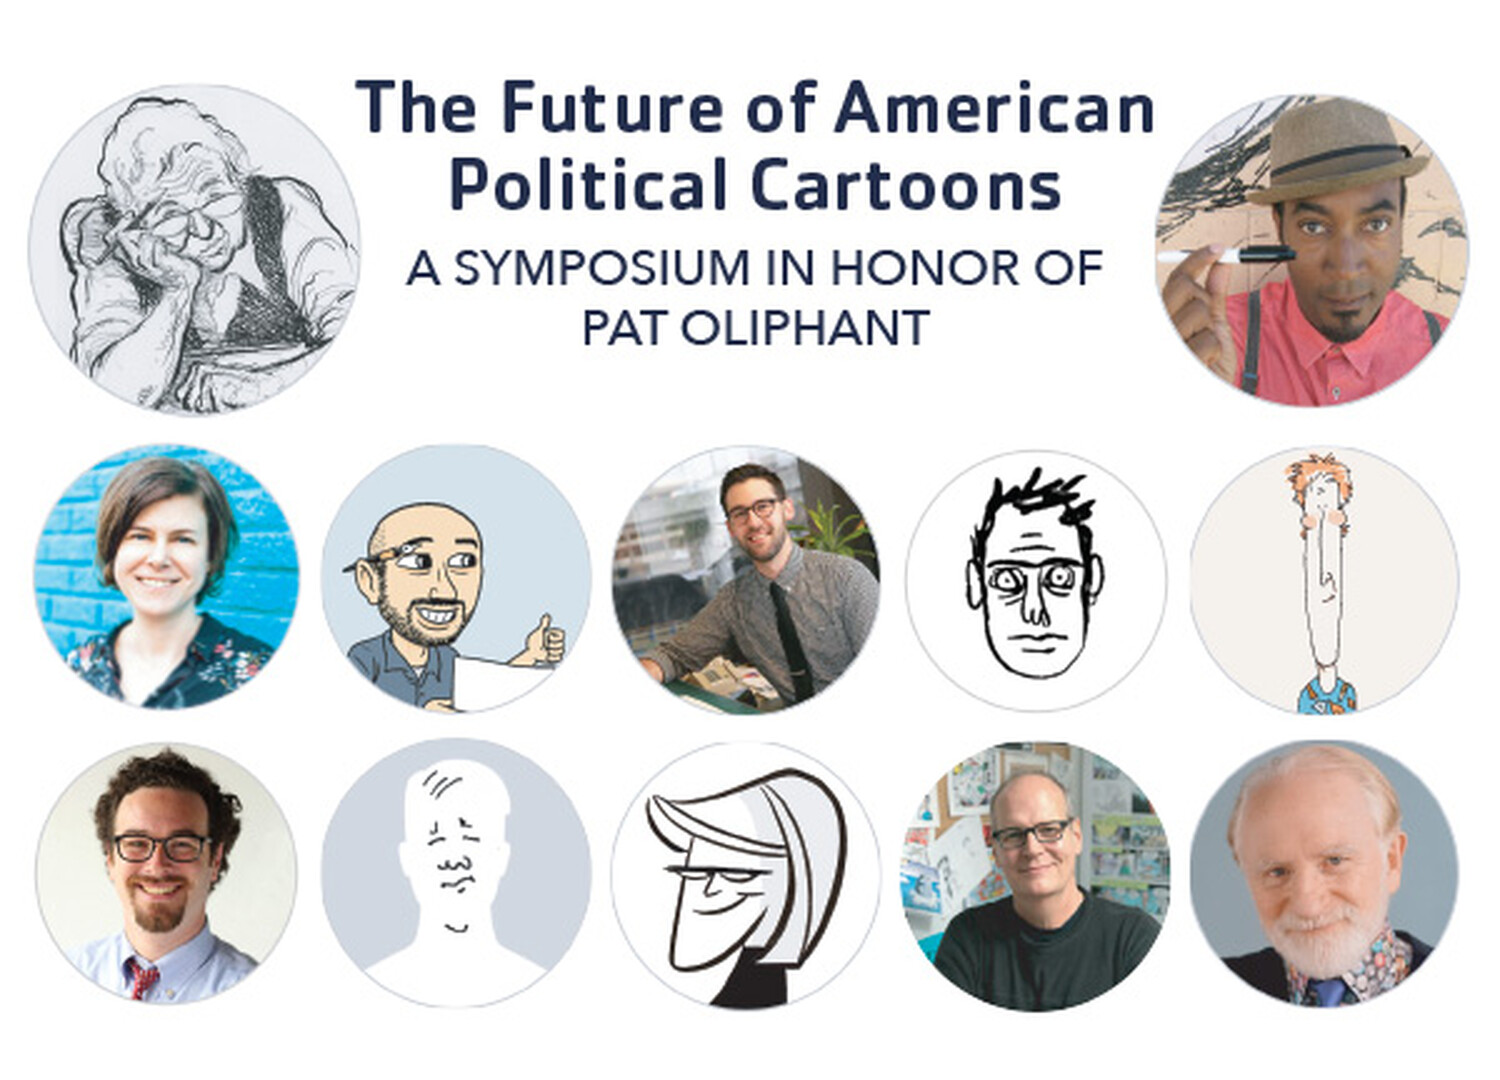 The Future of American Political Cartoons: A Symposium in Honor of Pat Oliphant